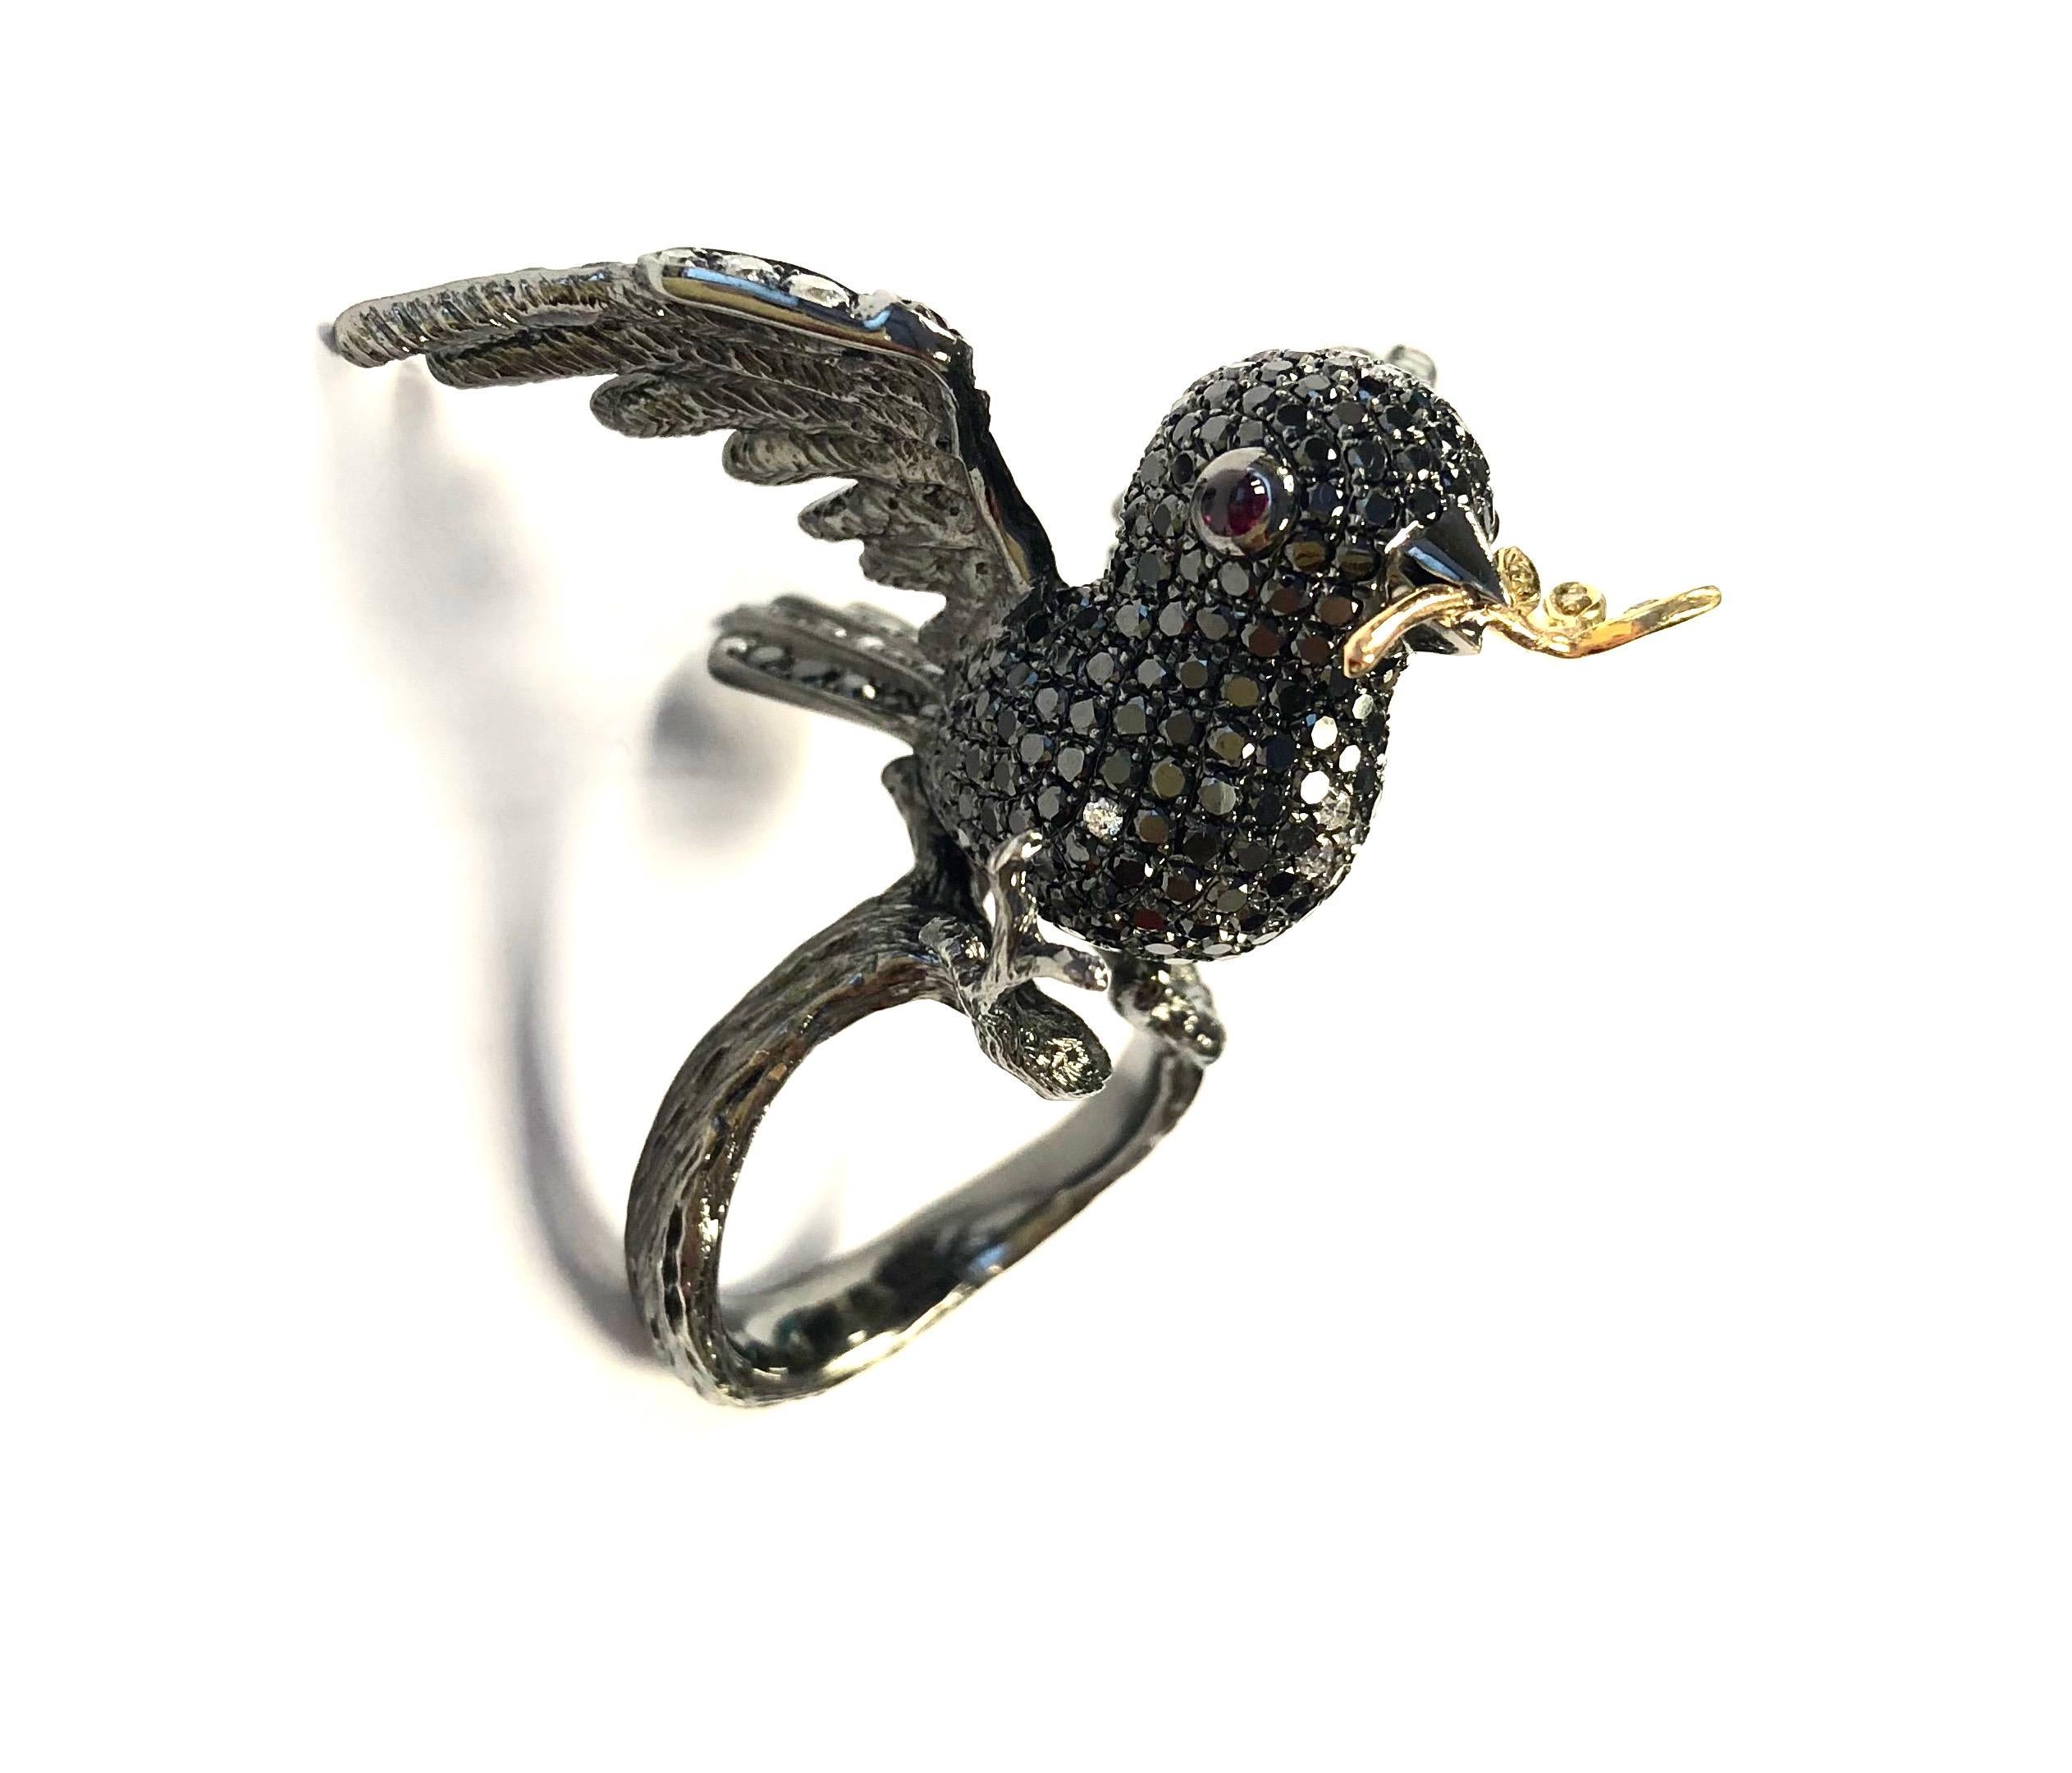 One-of-a-kind 18K gold ring, featuring a bird in flight holding a yellow diamond accented branch in its beak. The bird is set with black and white diamonds, accented by ruby cabochon eyes. The bird and the band are made of blackened gold, the branch